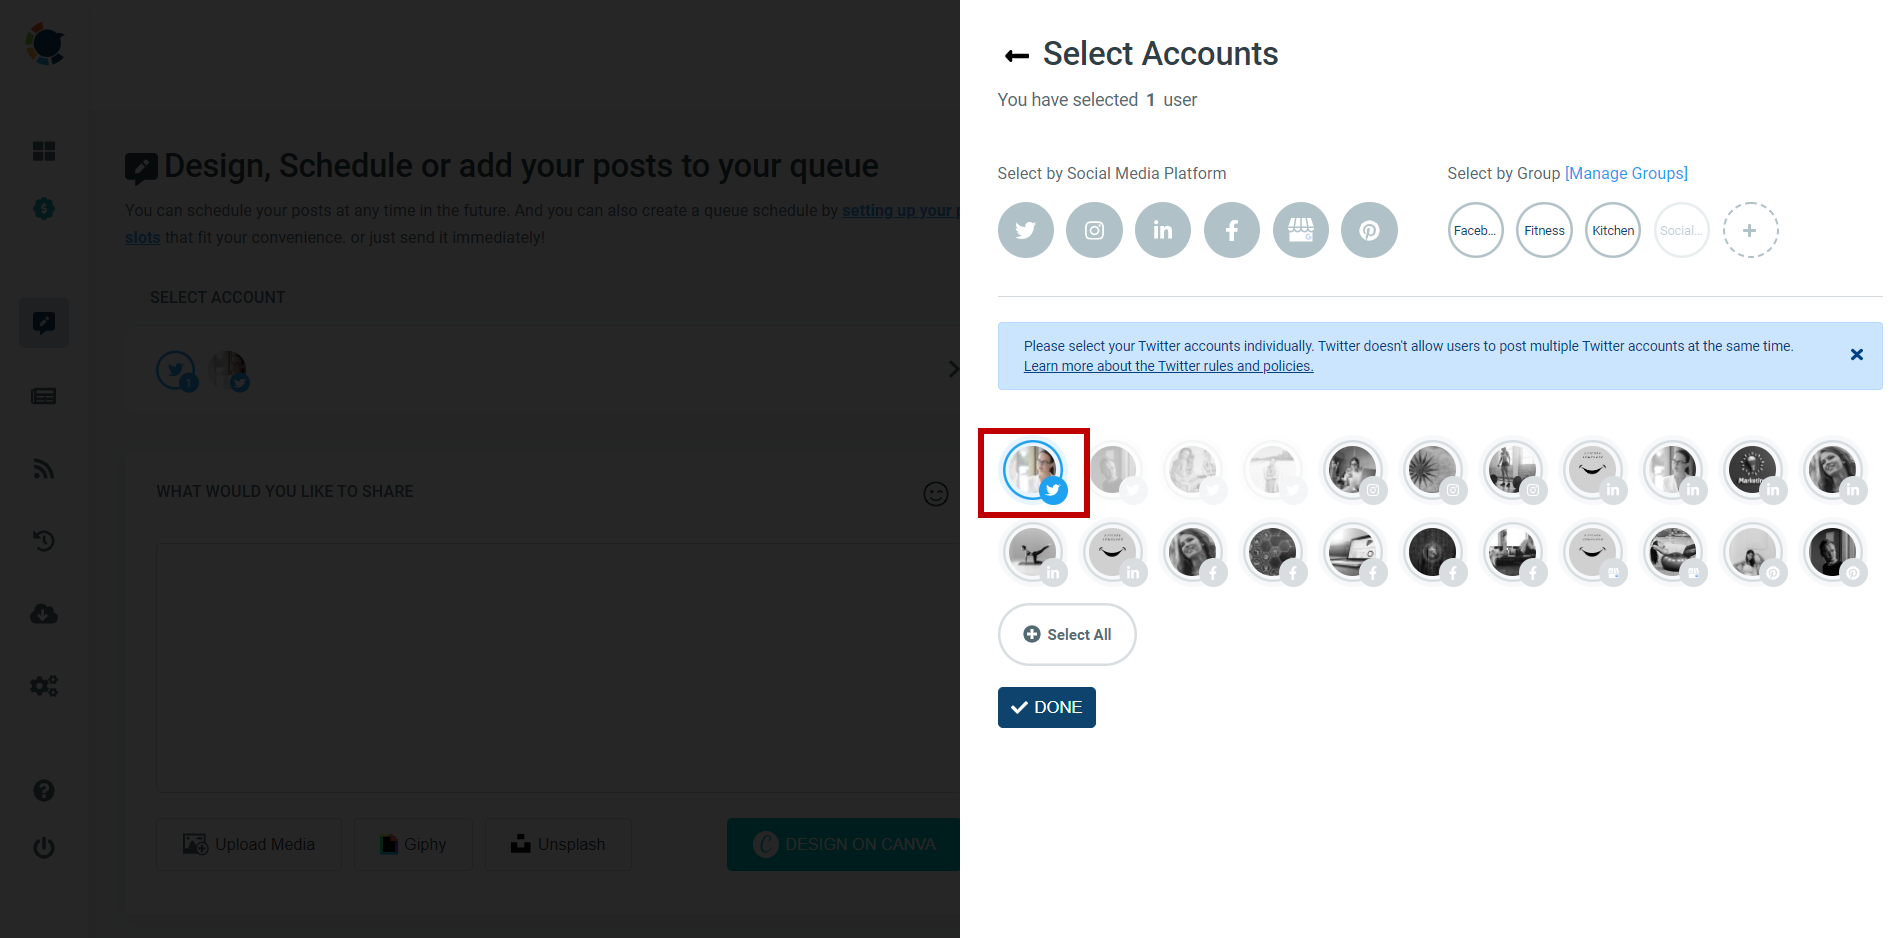 Connect and select your Twitter account to plan your future tweets!